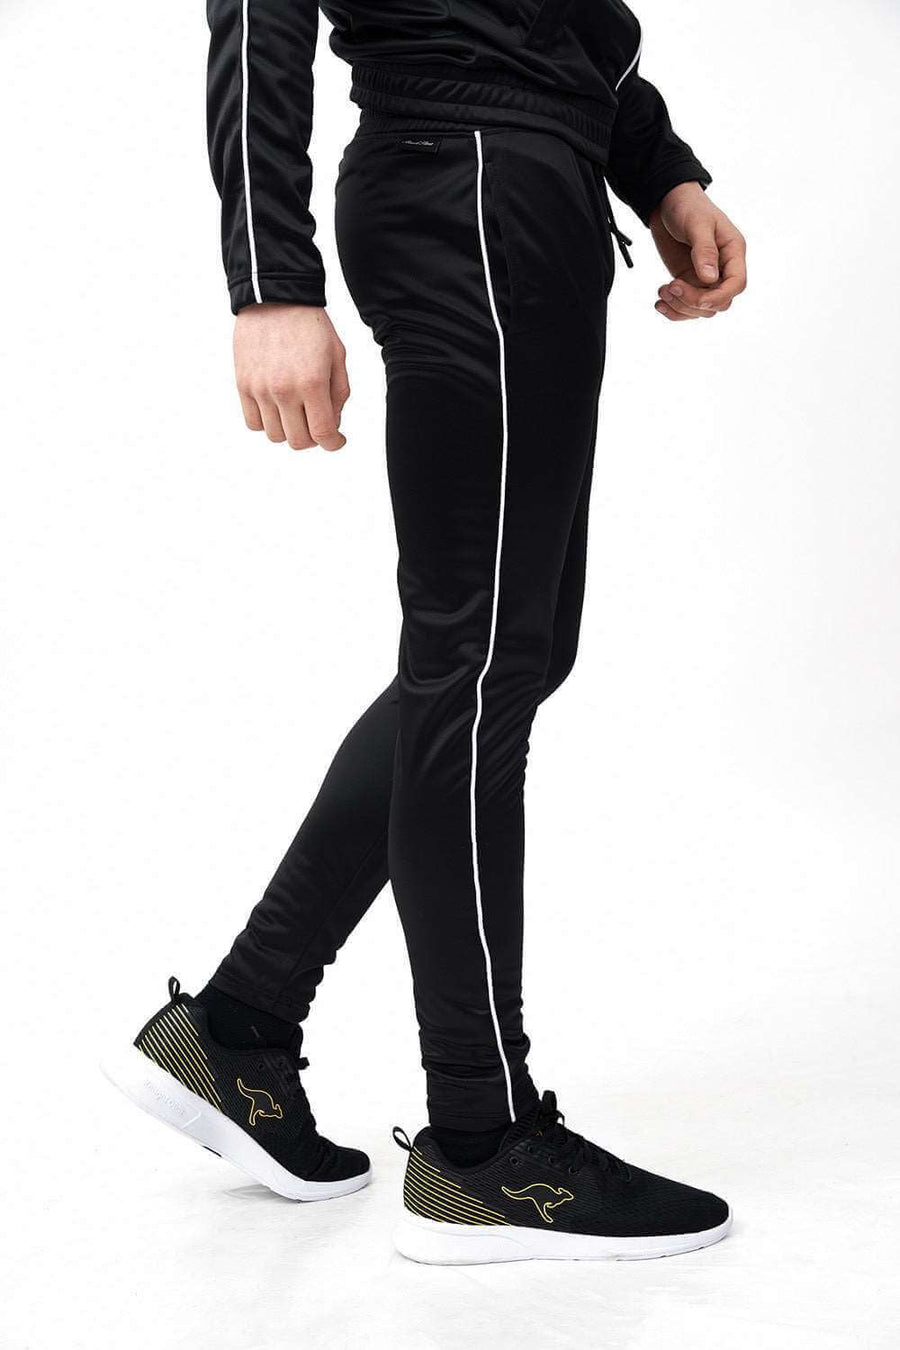 Skinny fit Joggers of Zipper Tricot Men's Tracksuit with Side Piping